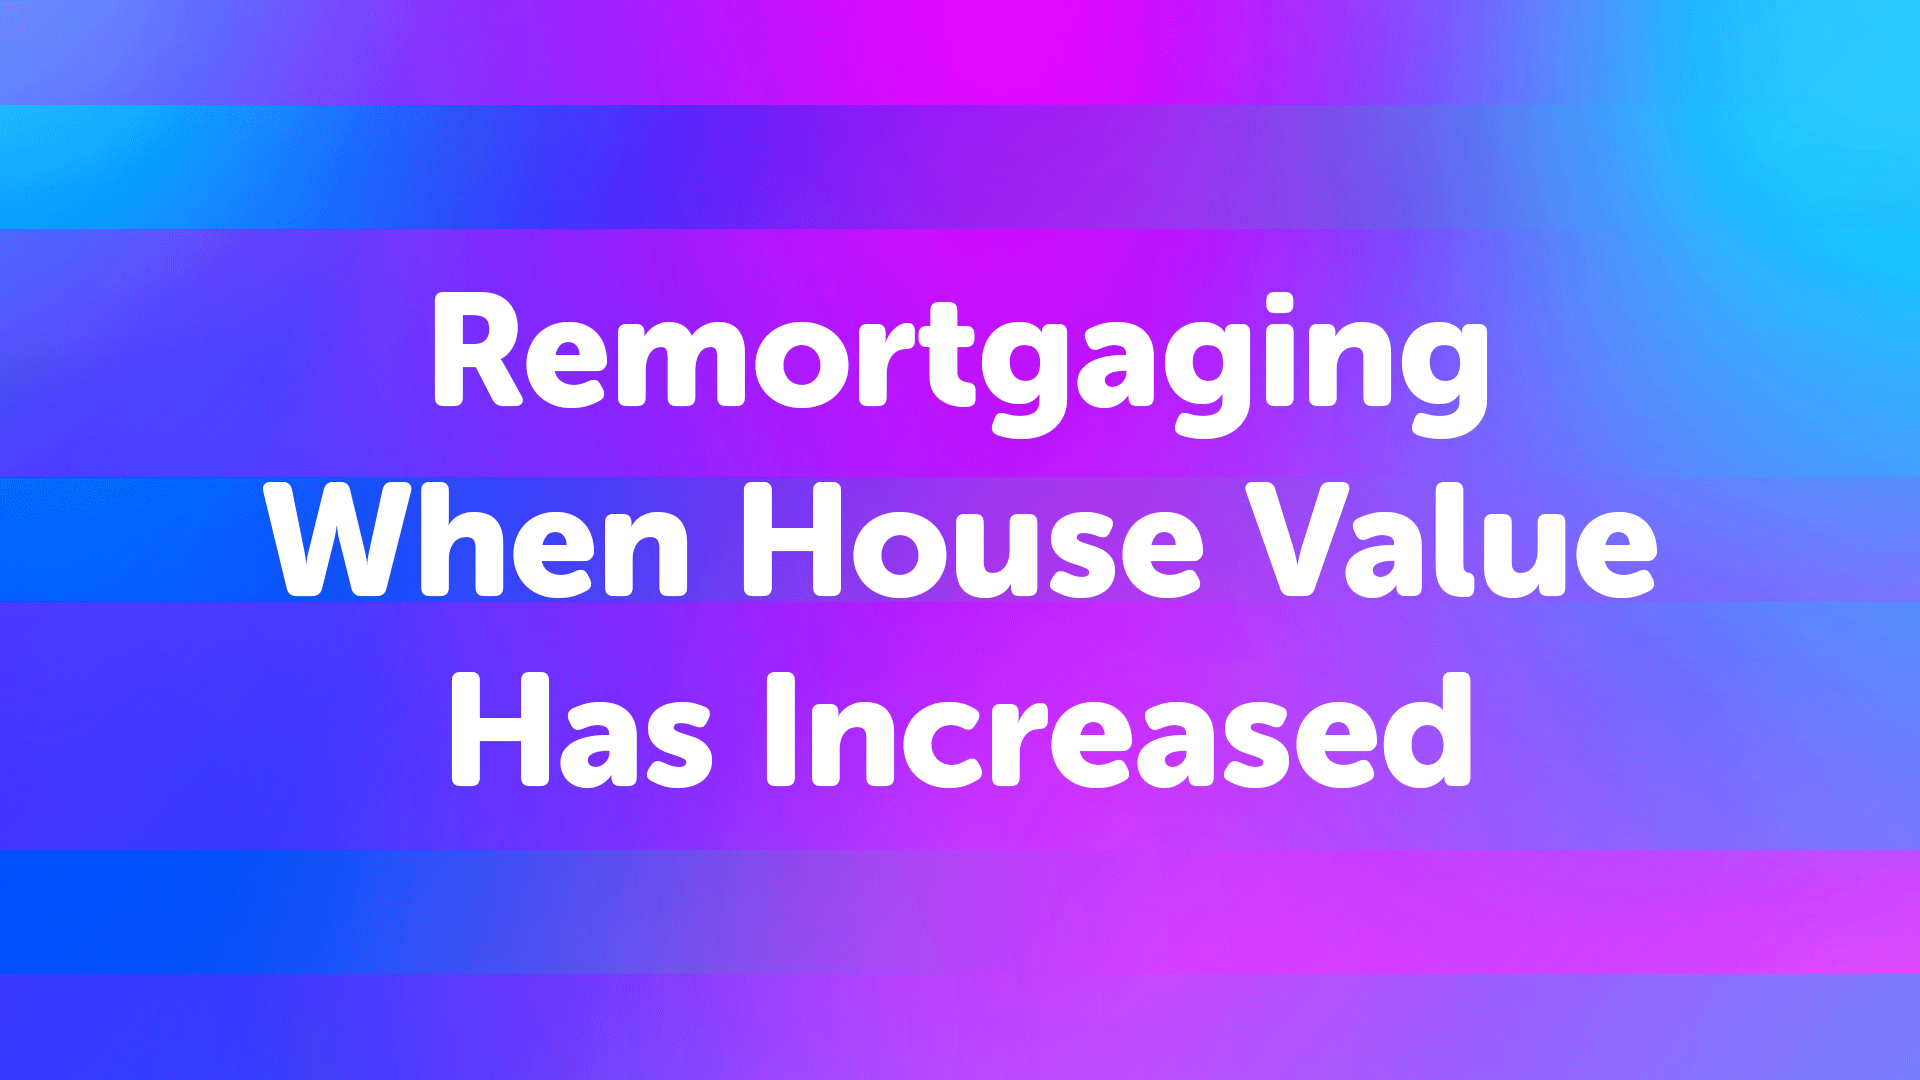 Remortgaging When House Value Has Increased in Leicester